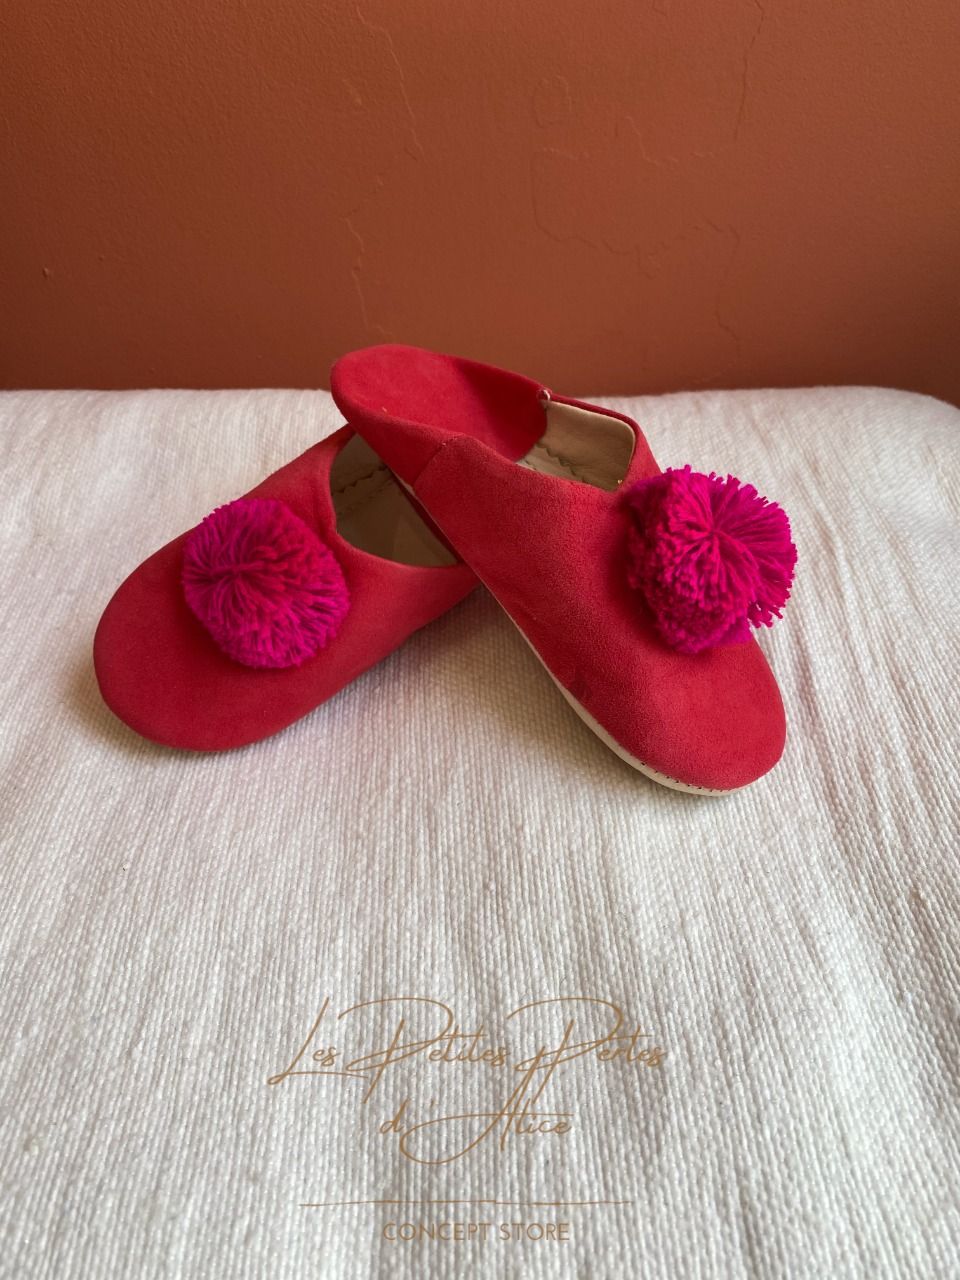 CHAUSSONS BABOUCHES  "FILLE" COQUELICOT  ROSE FUSHIA